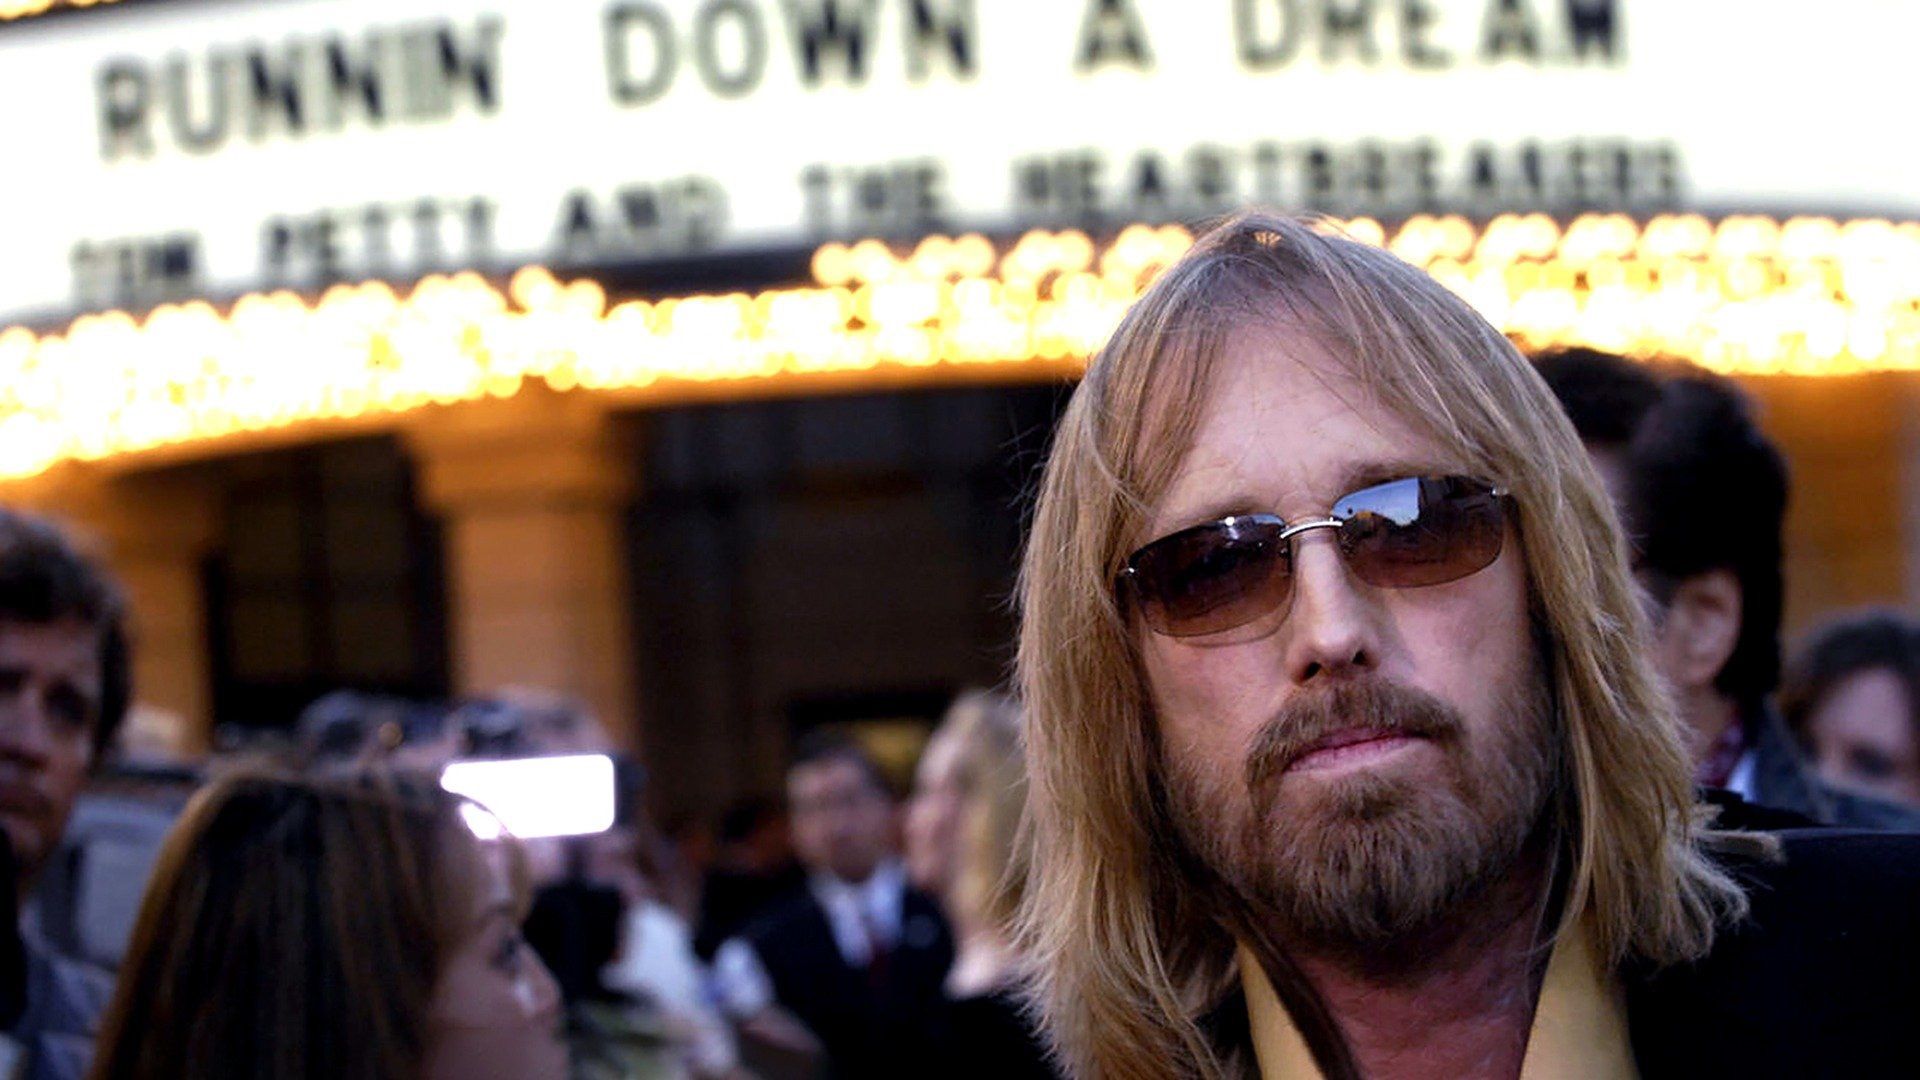 Tom Petty and the Heartbreakers - Runnin' Down a Dream Backdrop